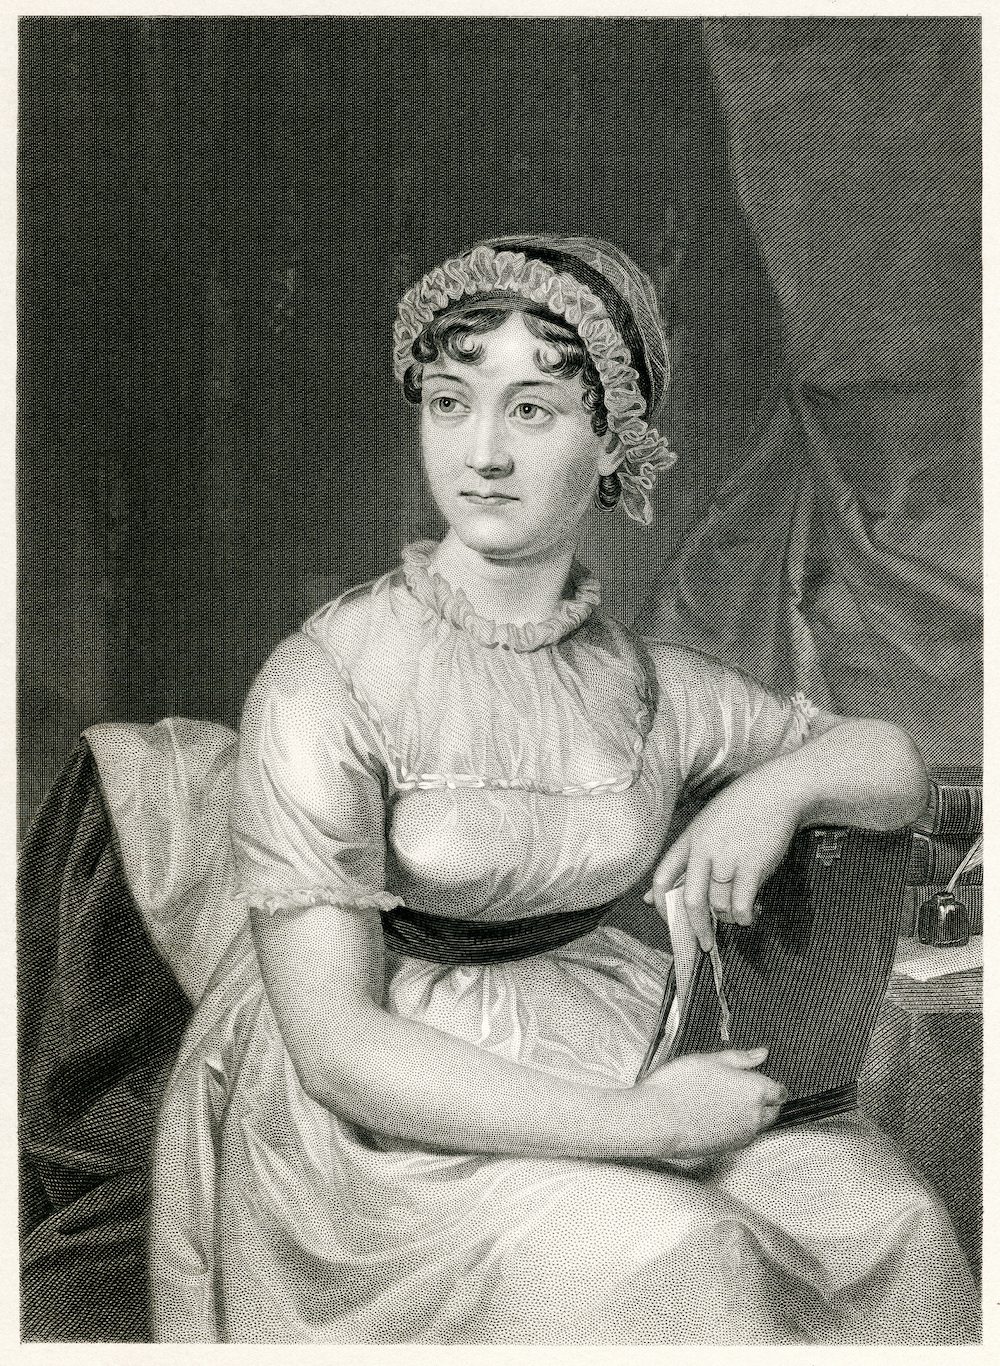 Engraving From 1873 Featuring The English Writer, Jane Austen.  Austen Lived From 1775 Until 1817.